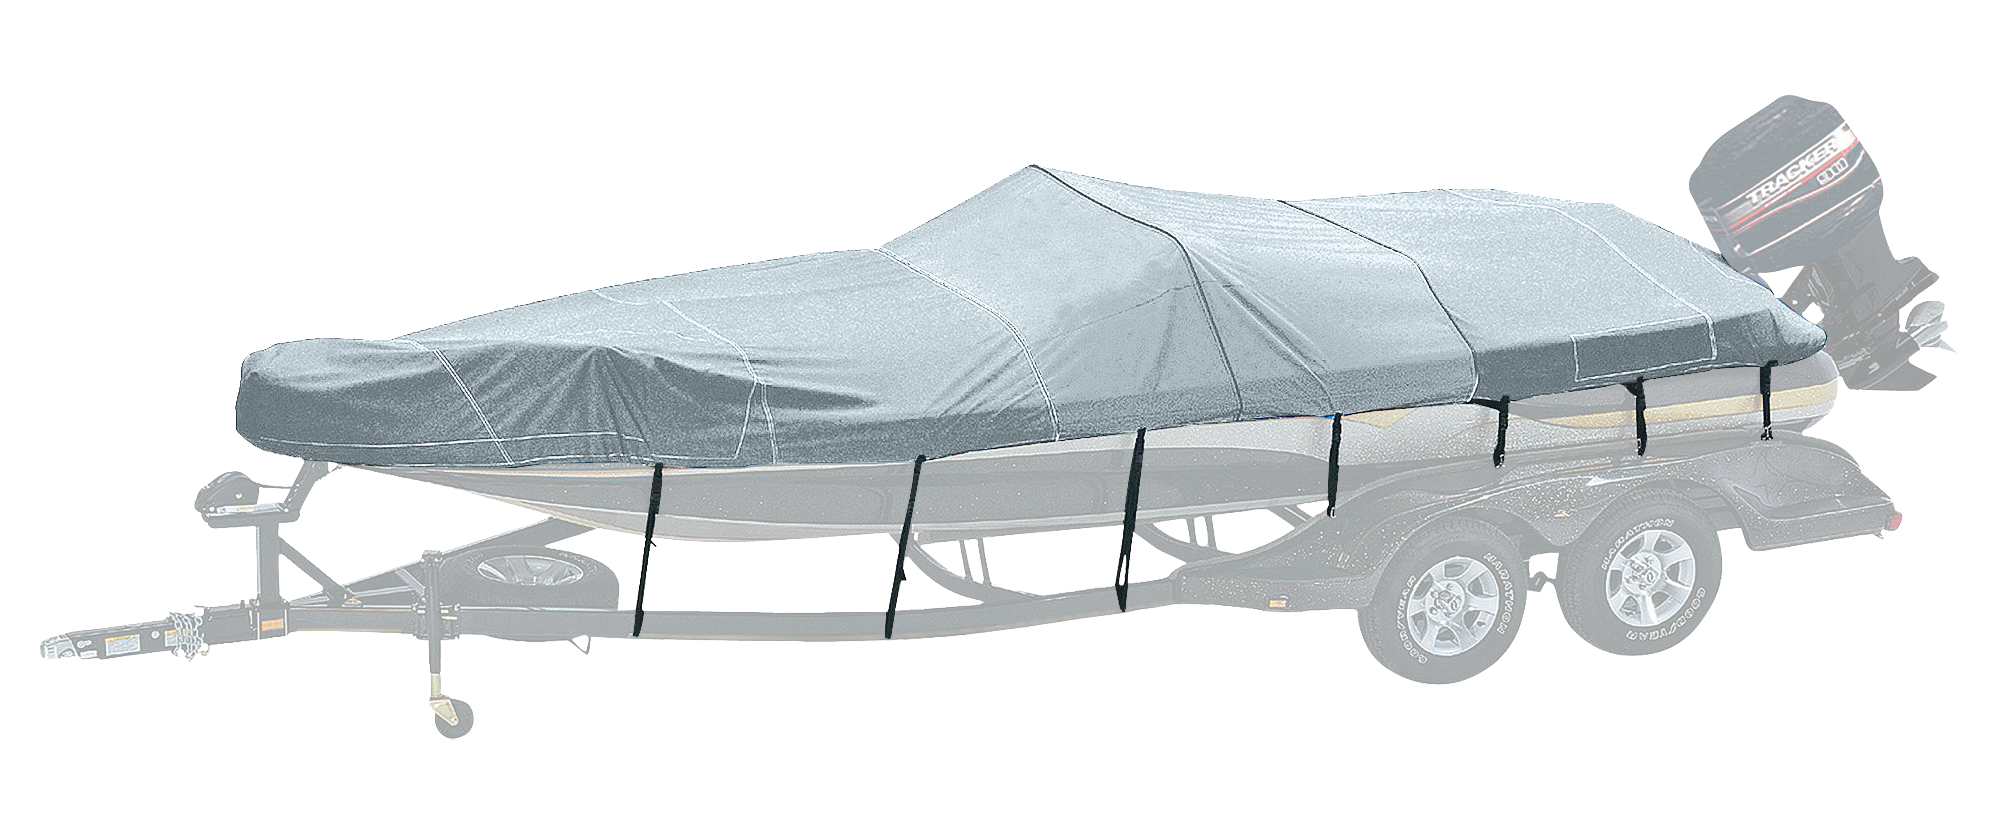 Bass Pro Shops Woodland Exact Fit Boat Cover - Tahoe Boats - 2005 215 Deckboat I/O - Arctic Silver